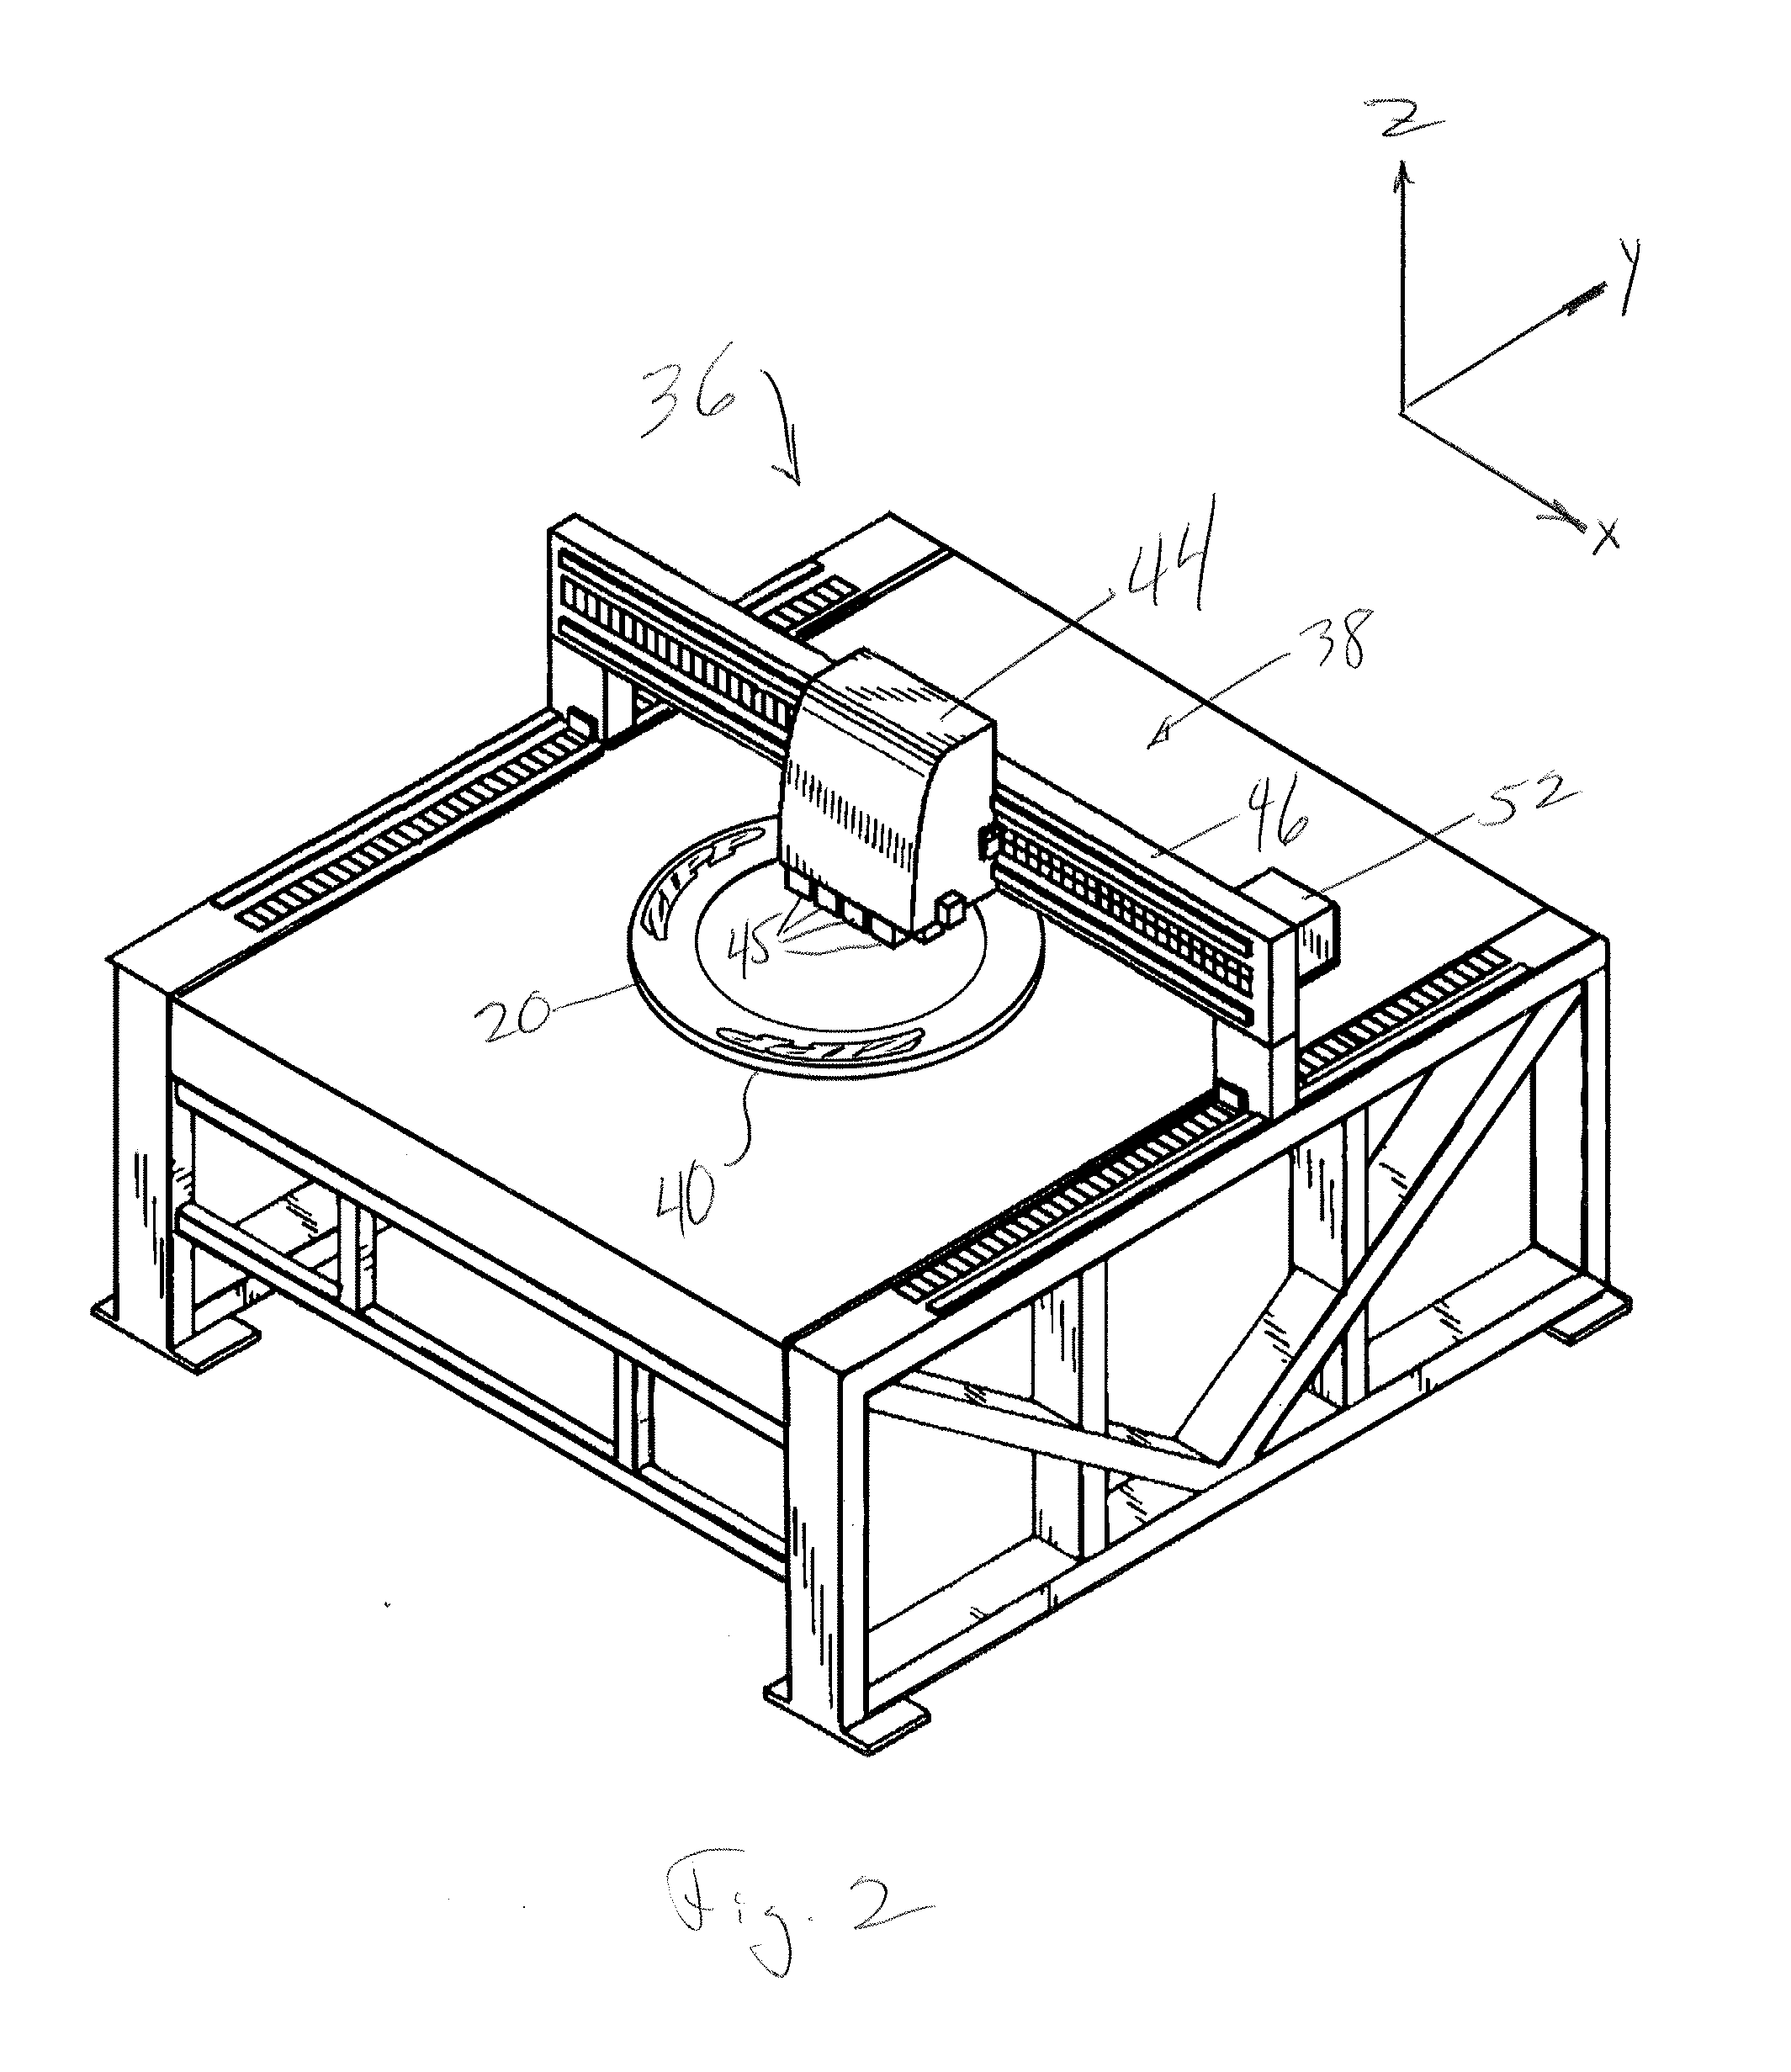 Vehicle rim with print graphics and methods of making